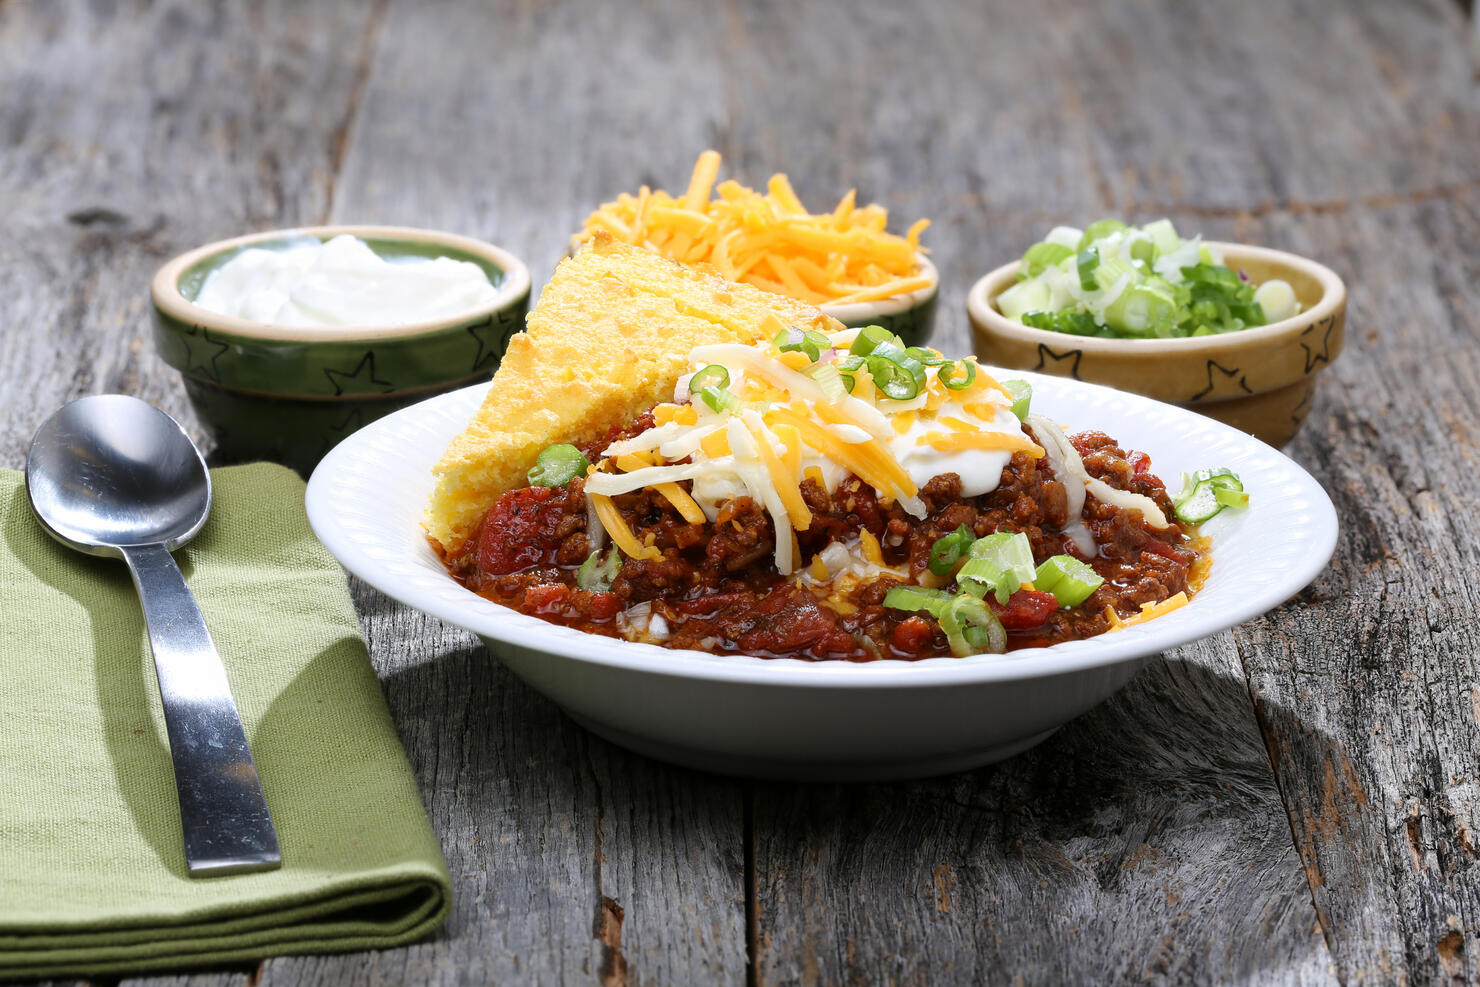 Chili with cornbread and fixings